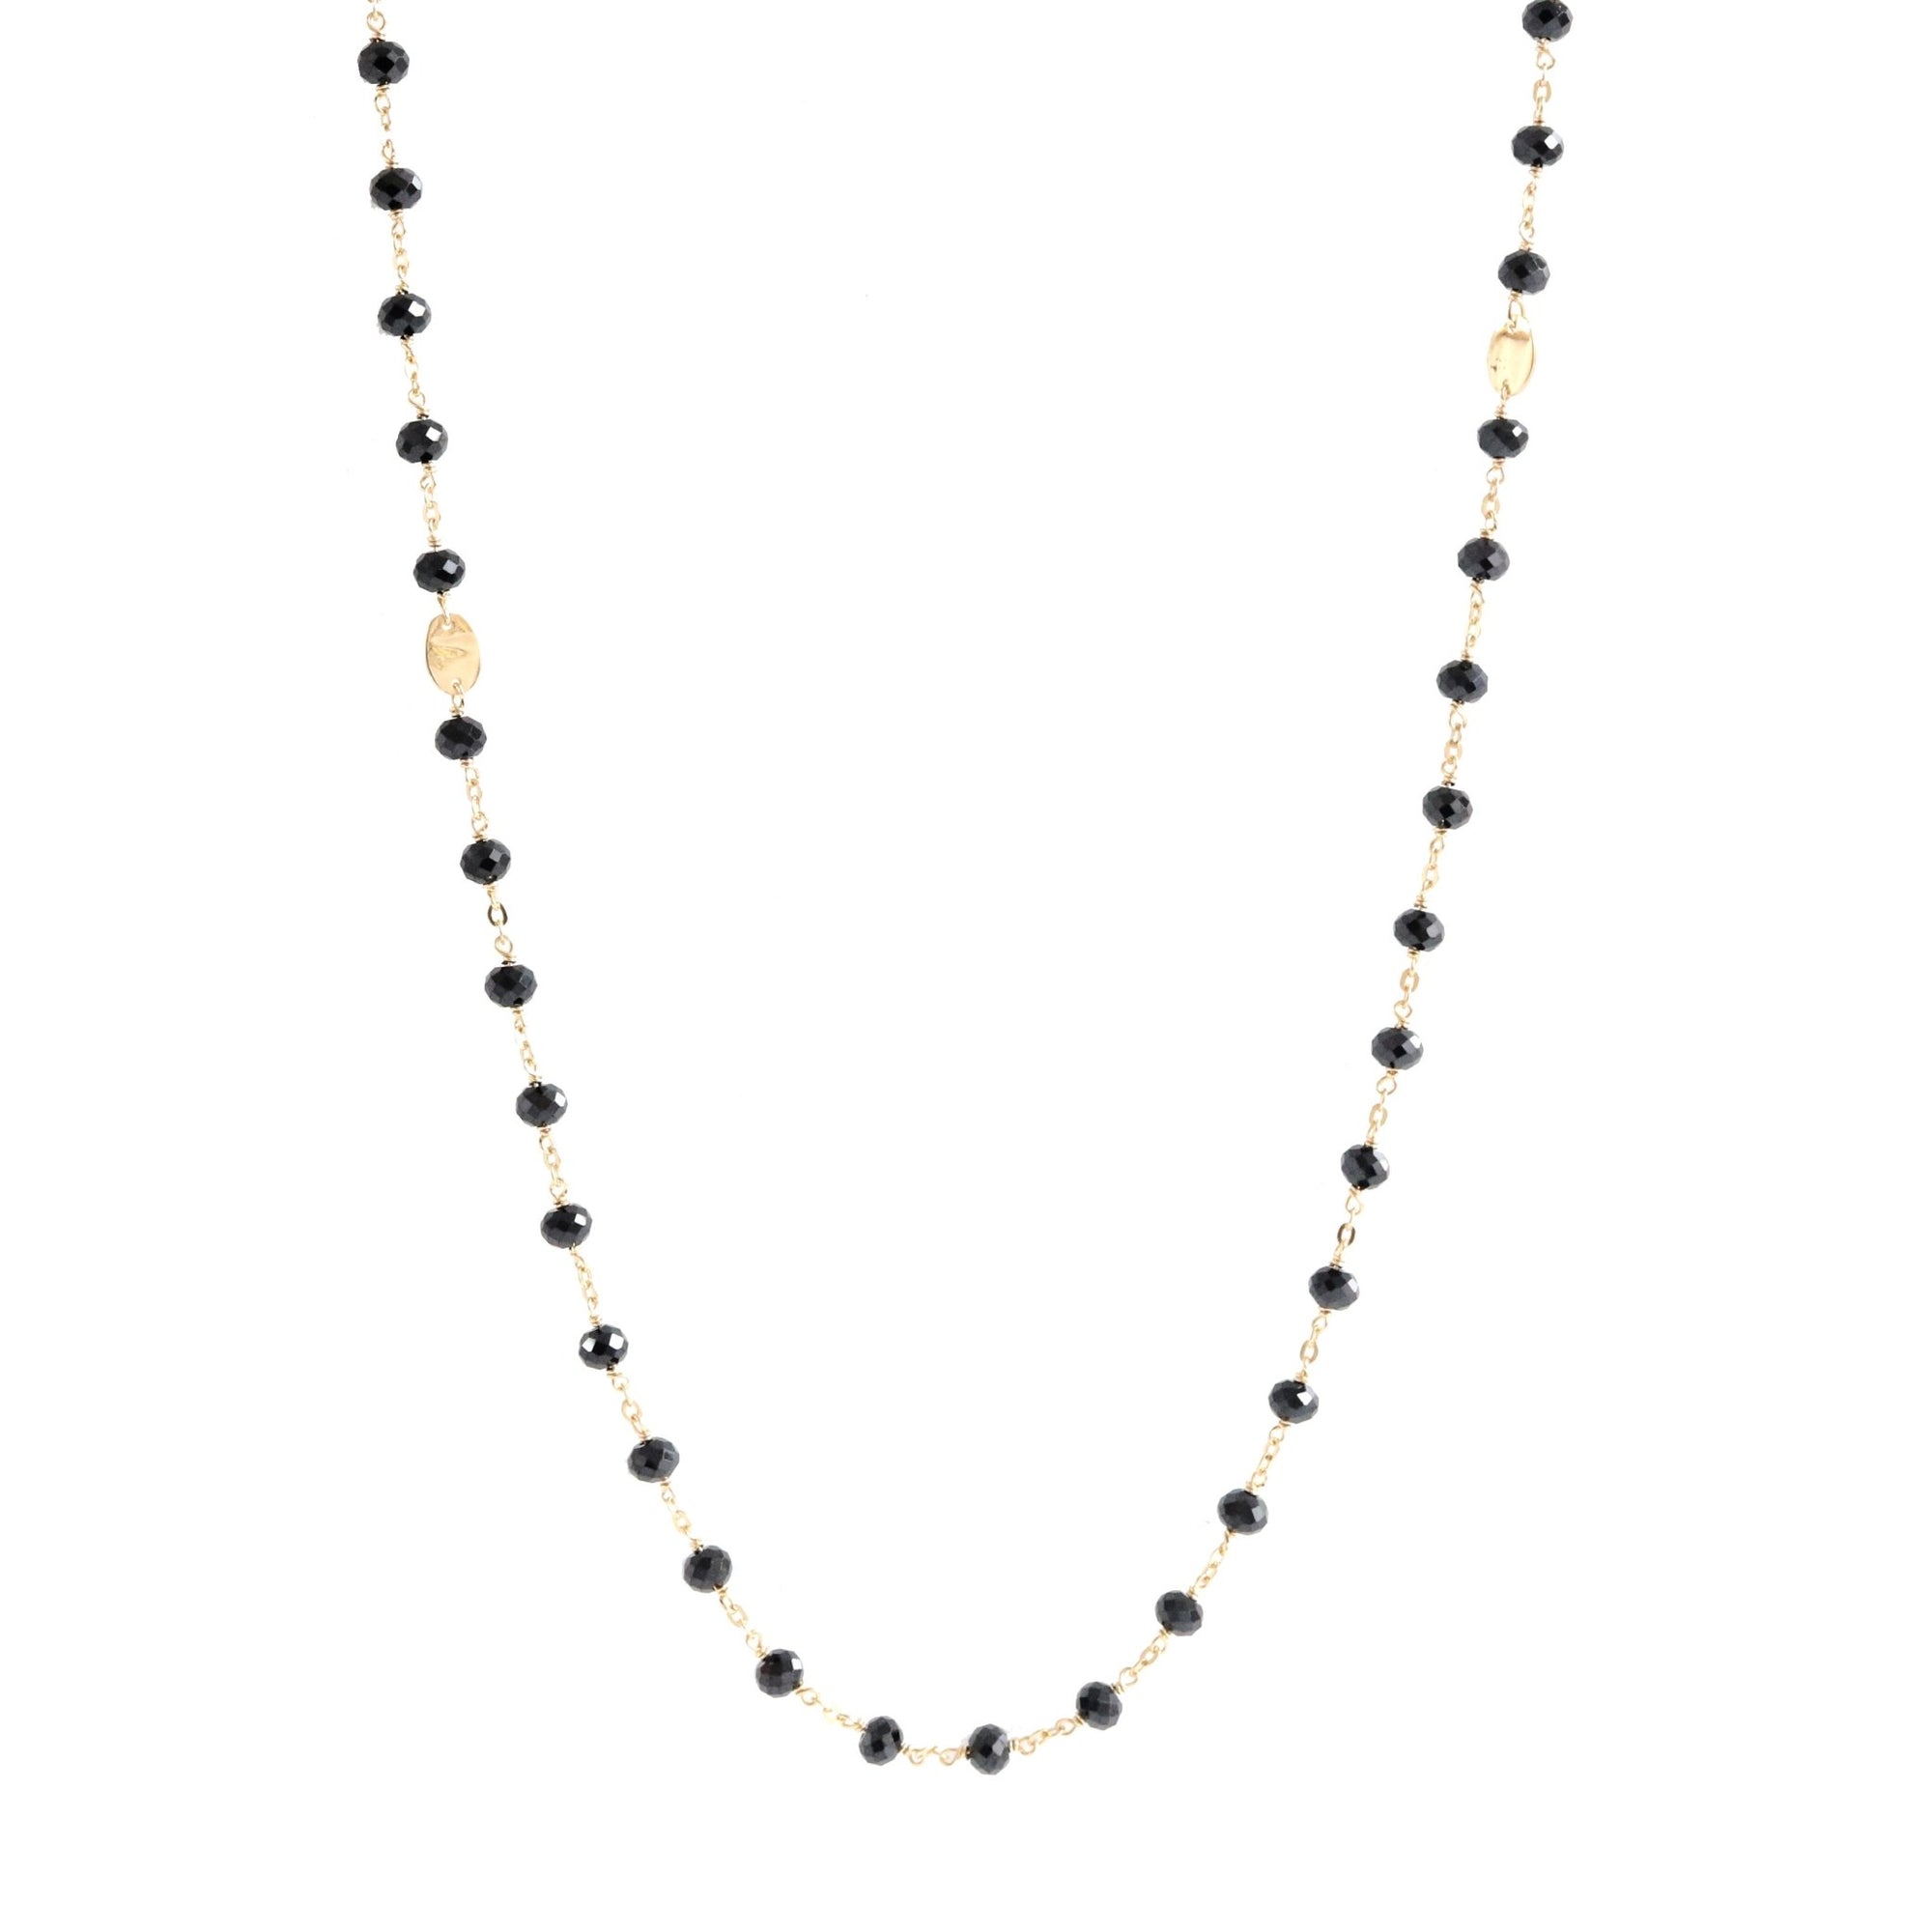 ICONIC LONG BEADED NECKLACE - BLACK ONYX & GOLD 34" - SO PRETTY CARA COTTER